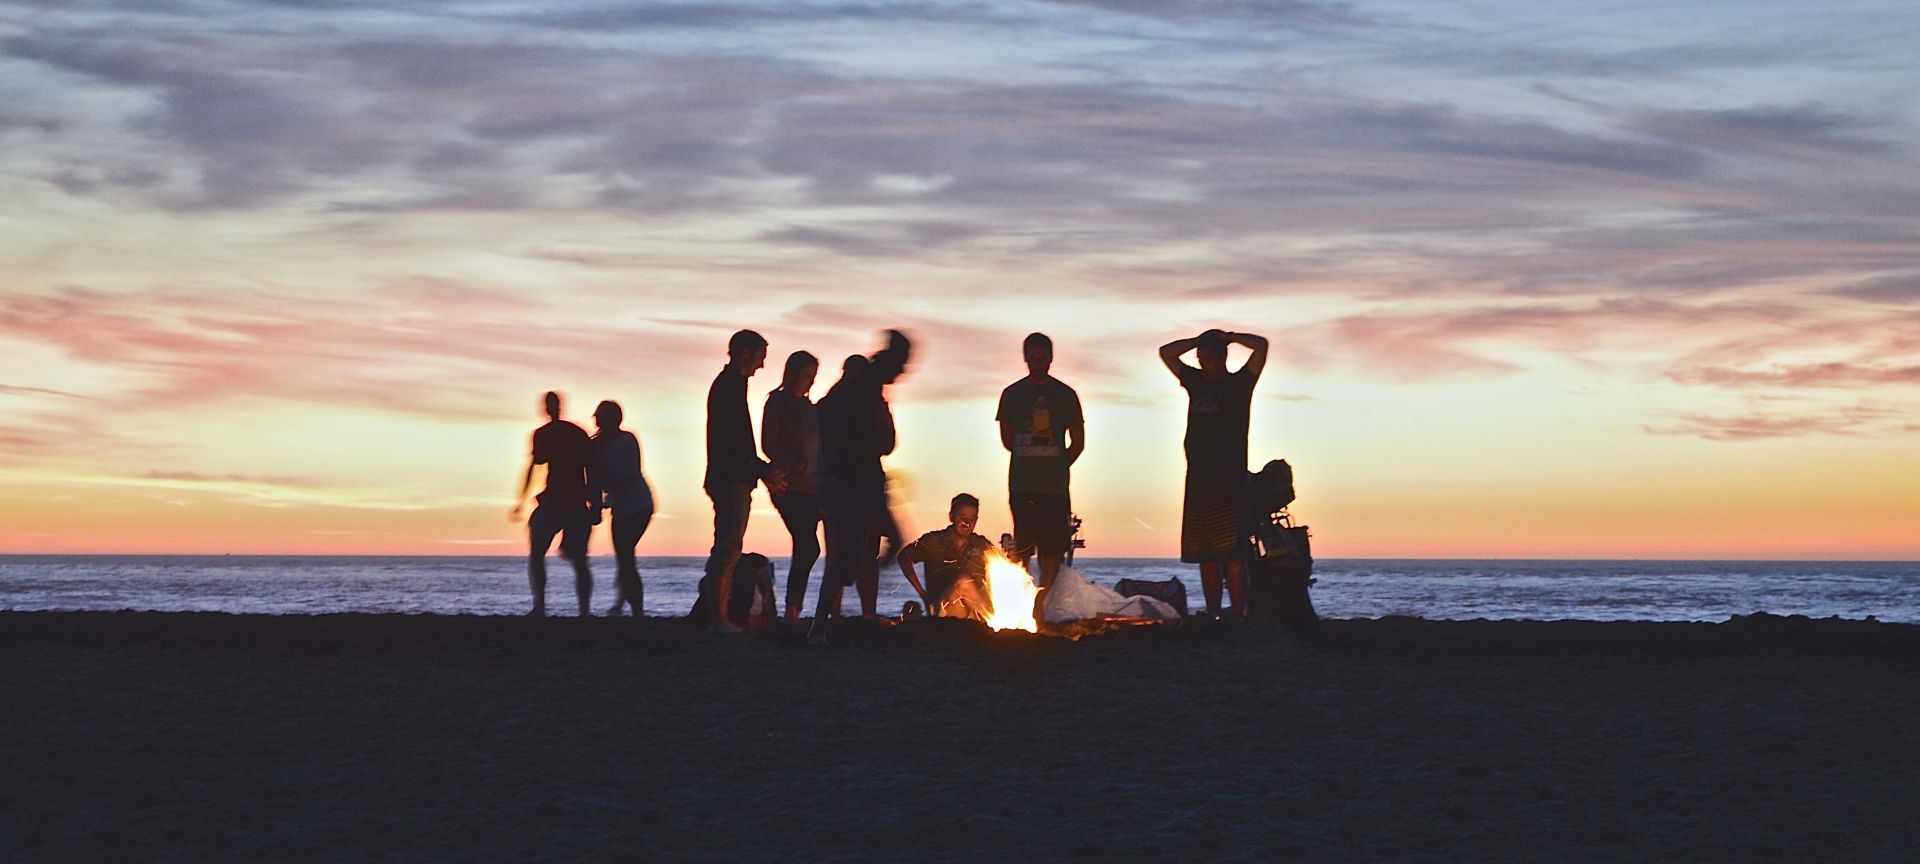 A Group Of People On A Beach Near A Body Of Water